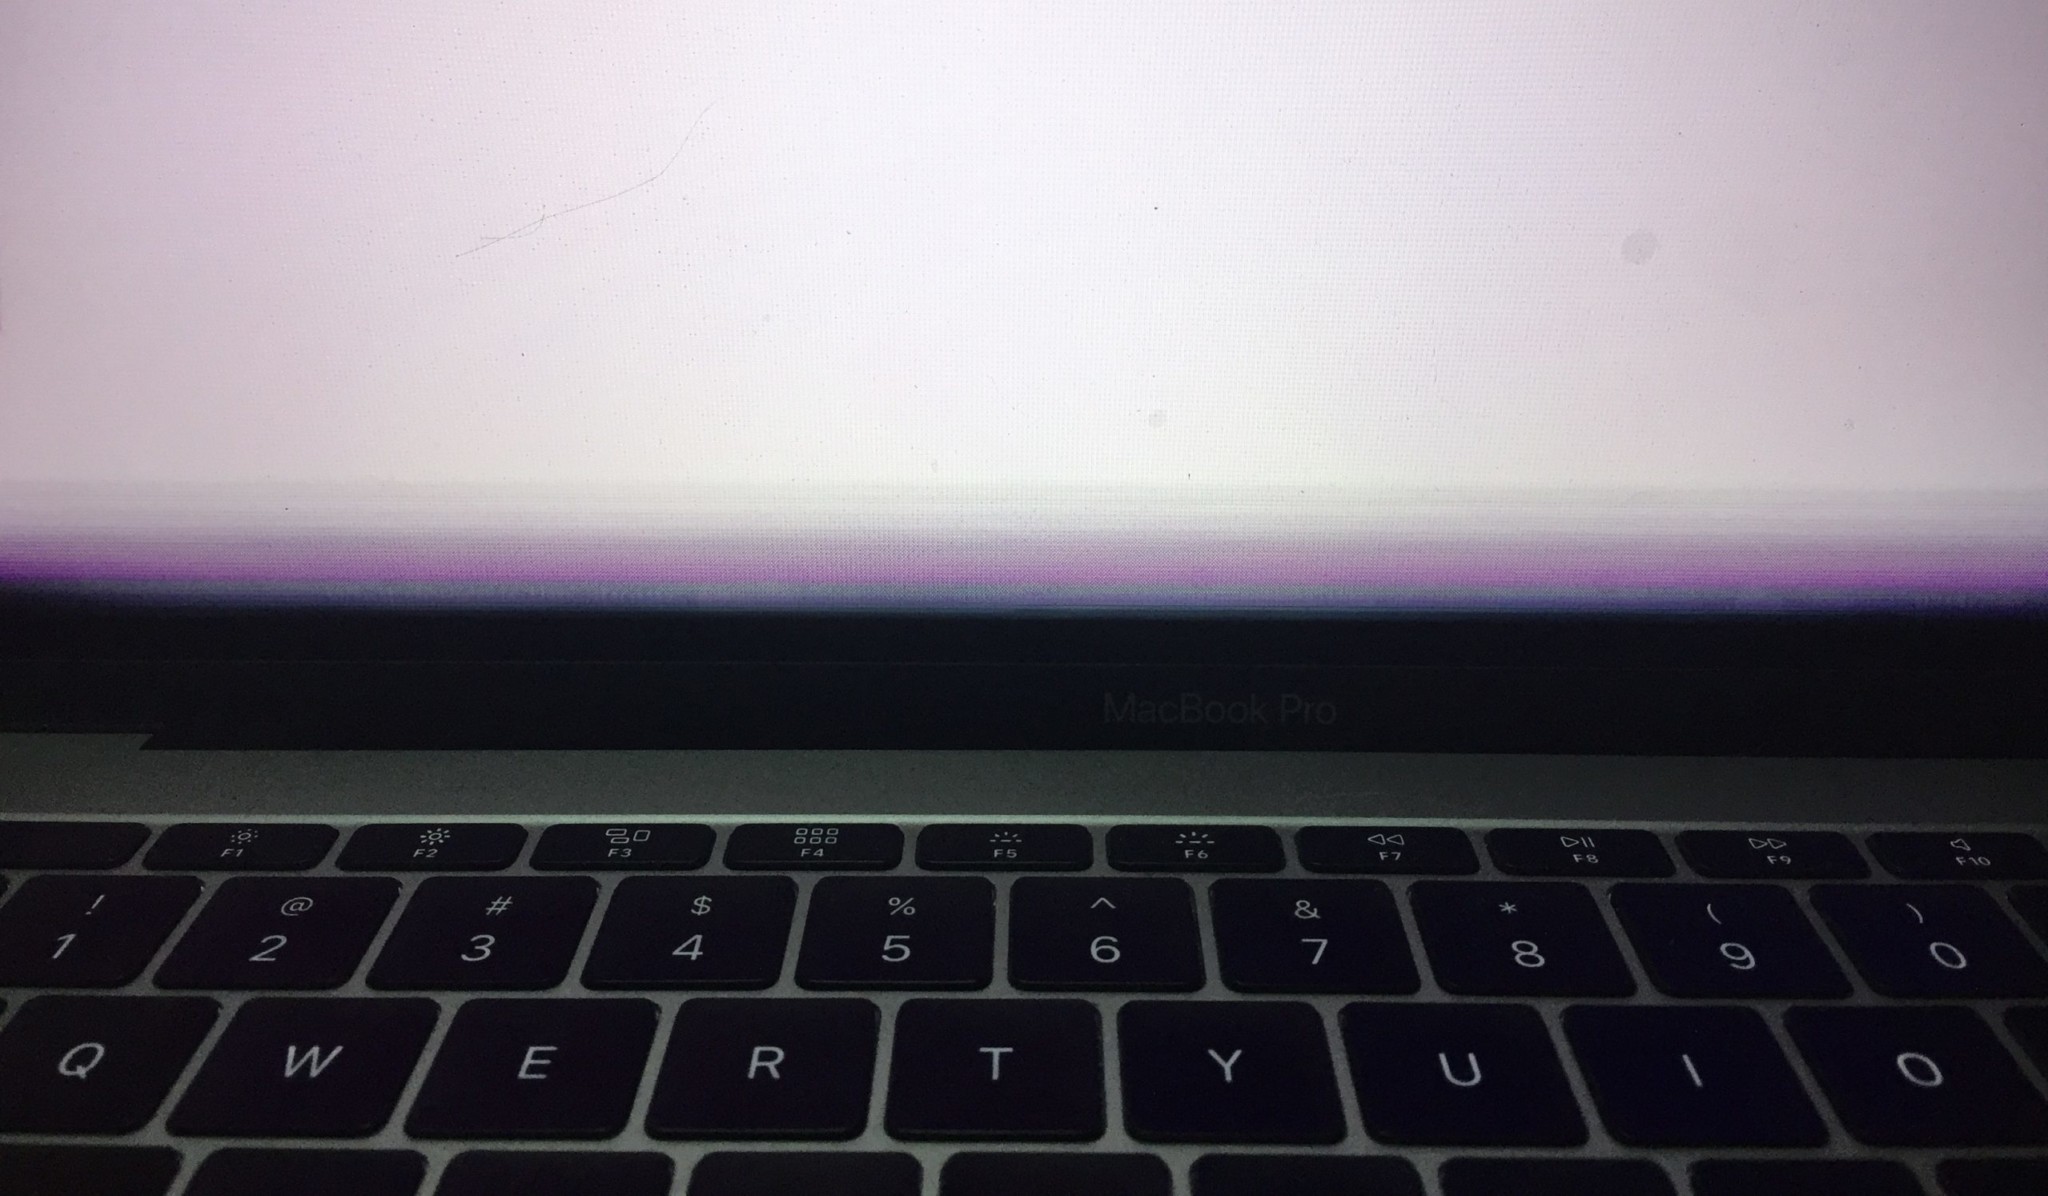 MacBook Pro Display Issue: What to do? - TechRechard